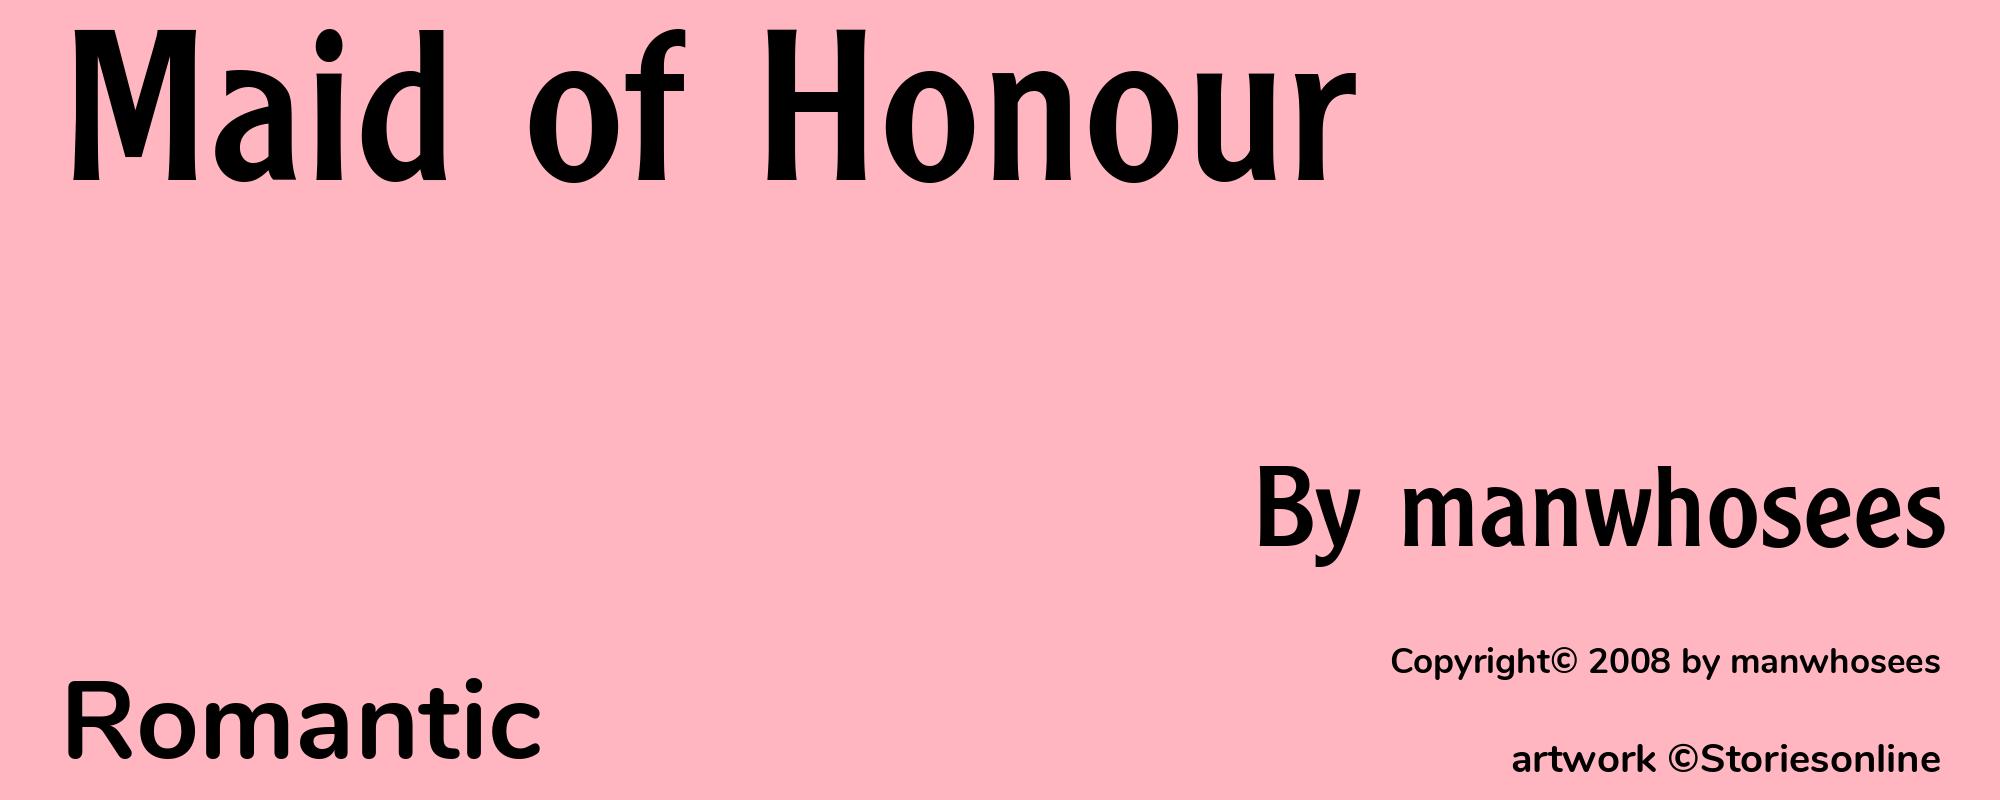 Maid of Honour - Cover